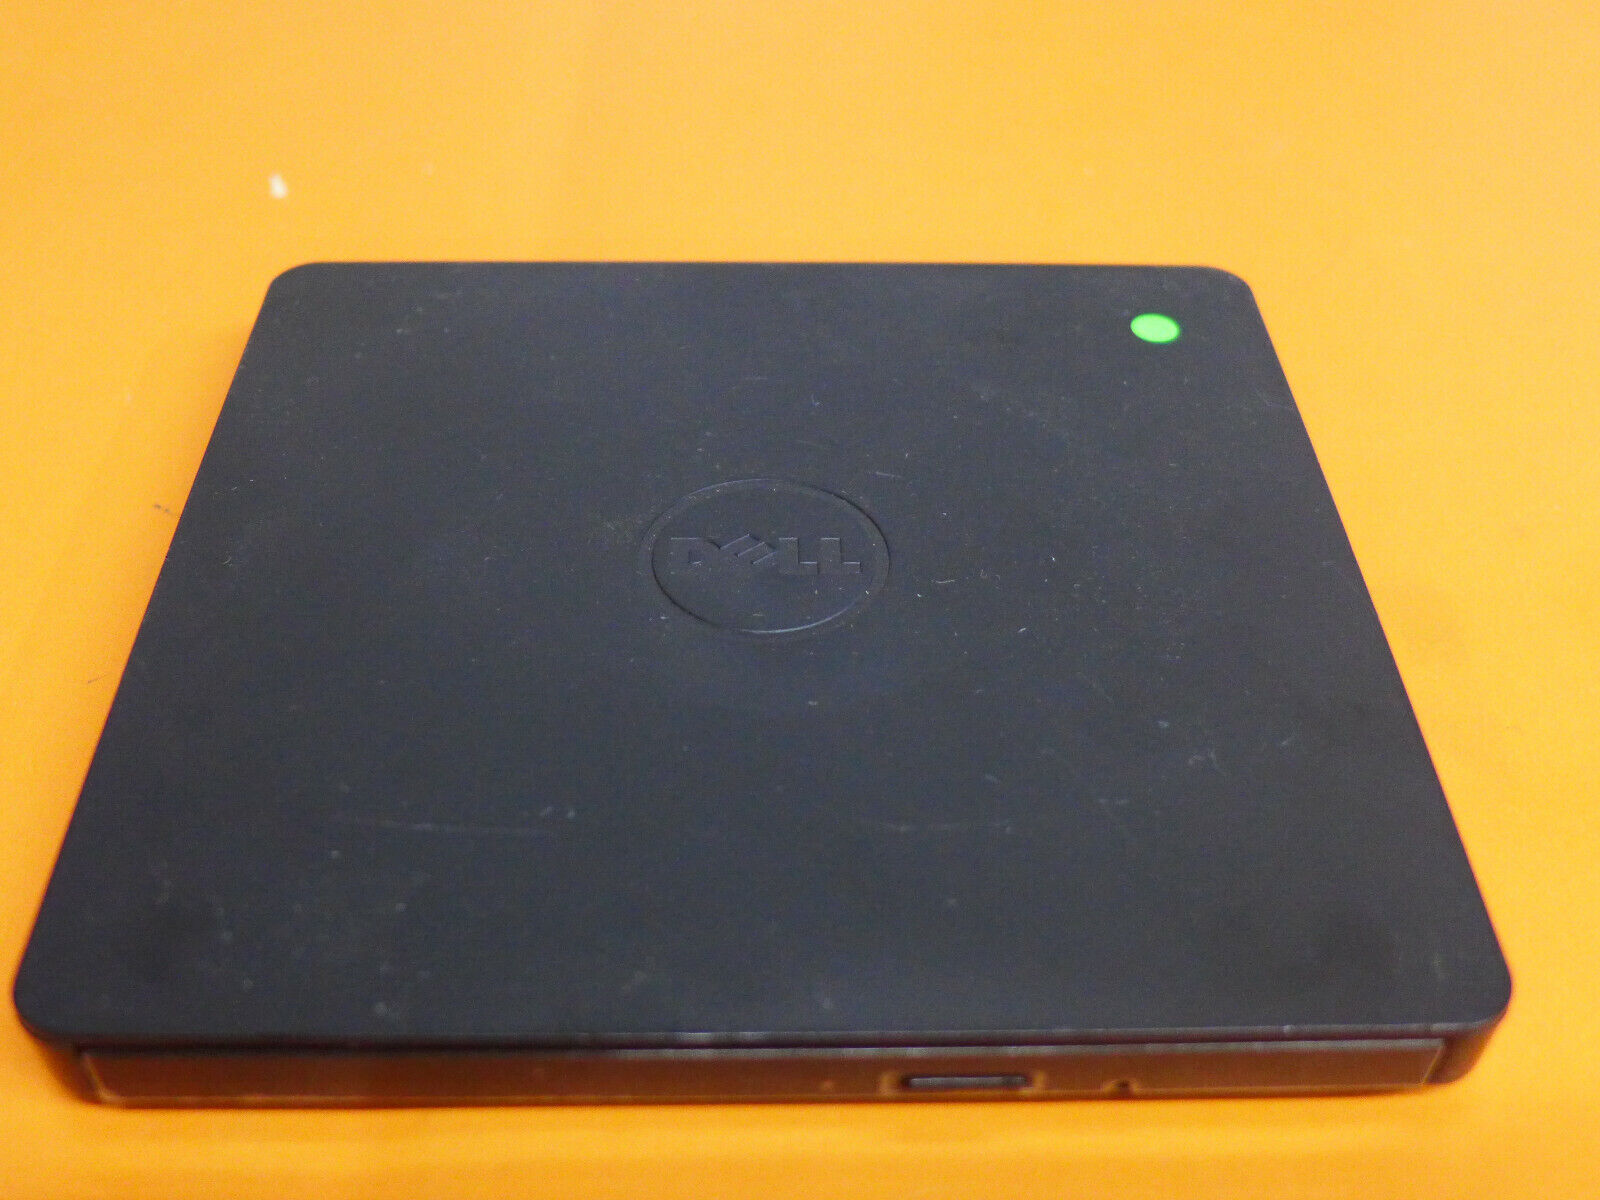 Genuine Dell DW316 External DVD-RW USB Optical Drive w/Cable RKR9T